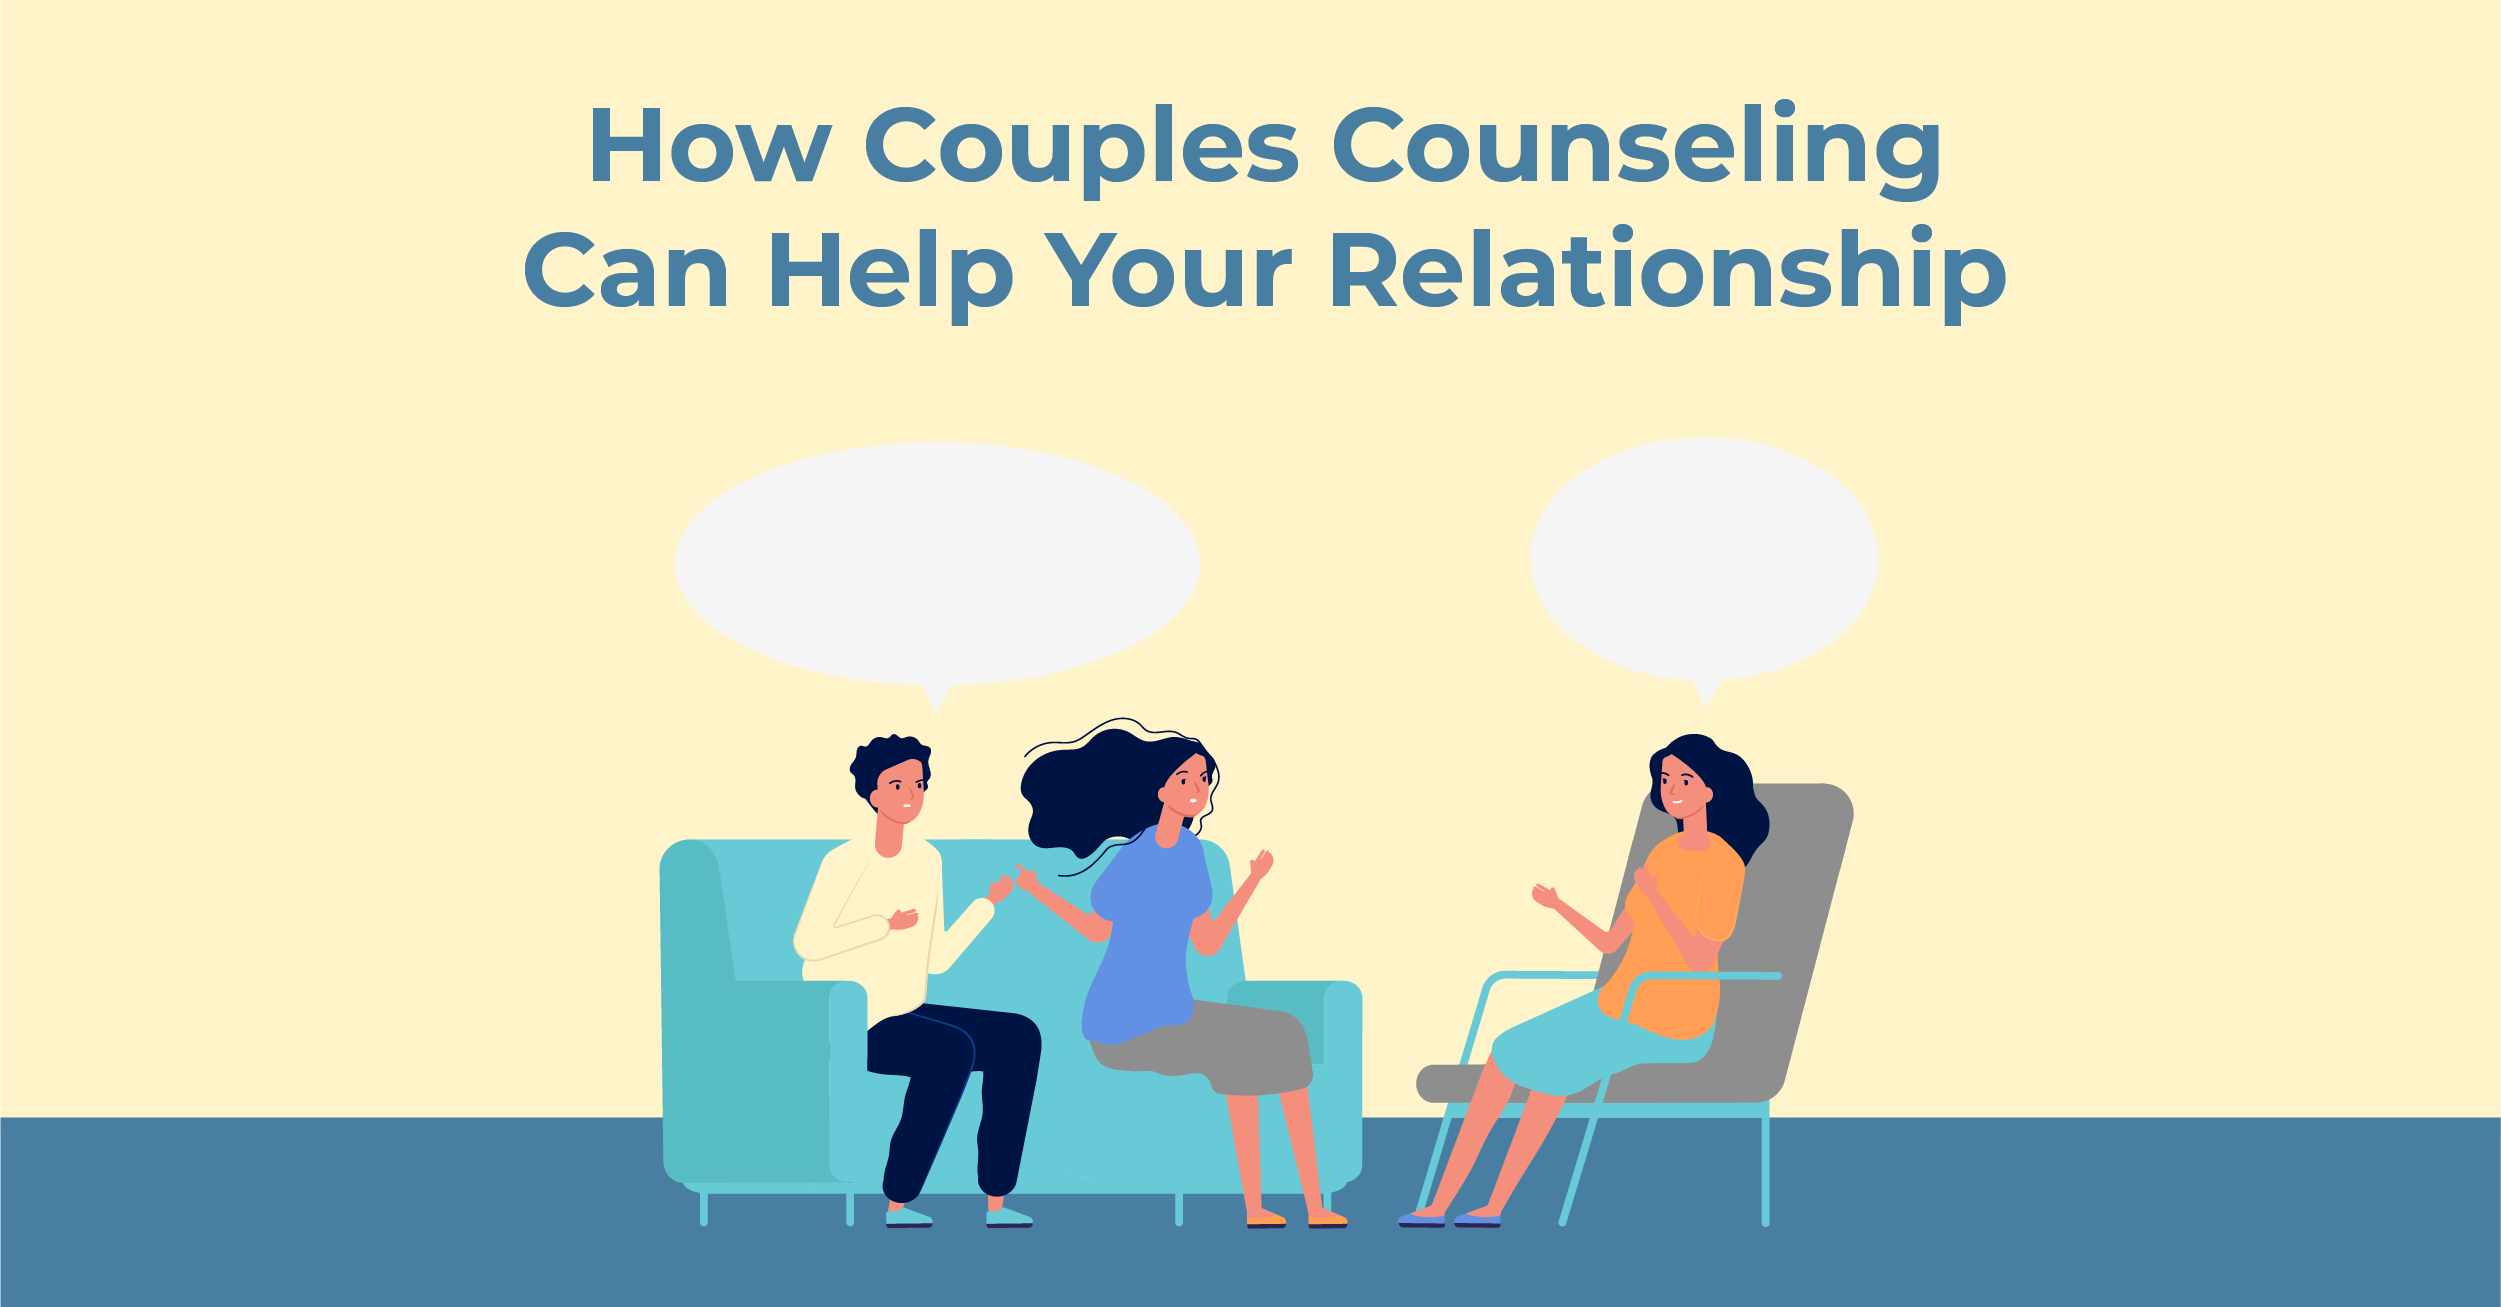 How Couples Counseling Can Help Your Relationship